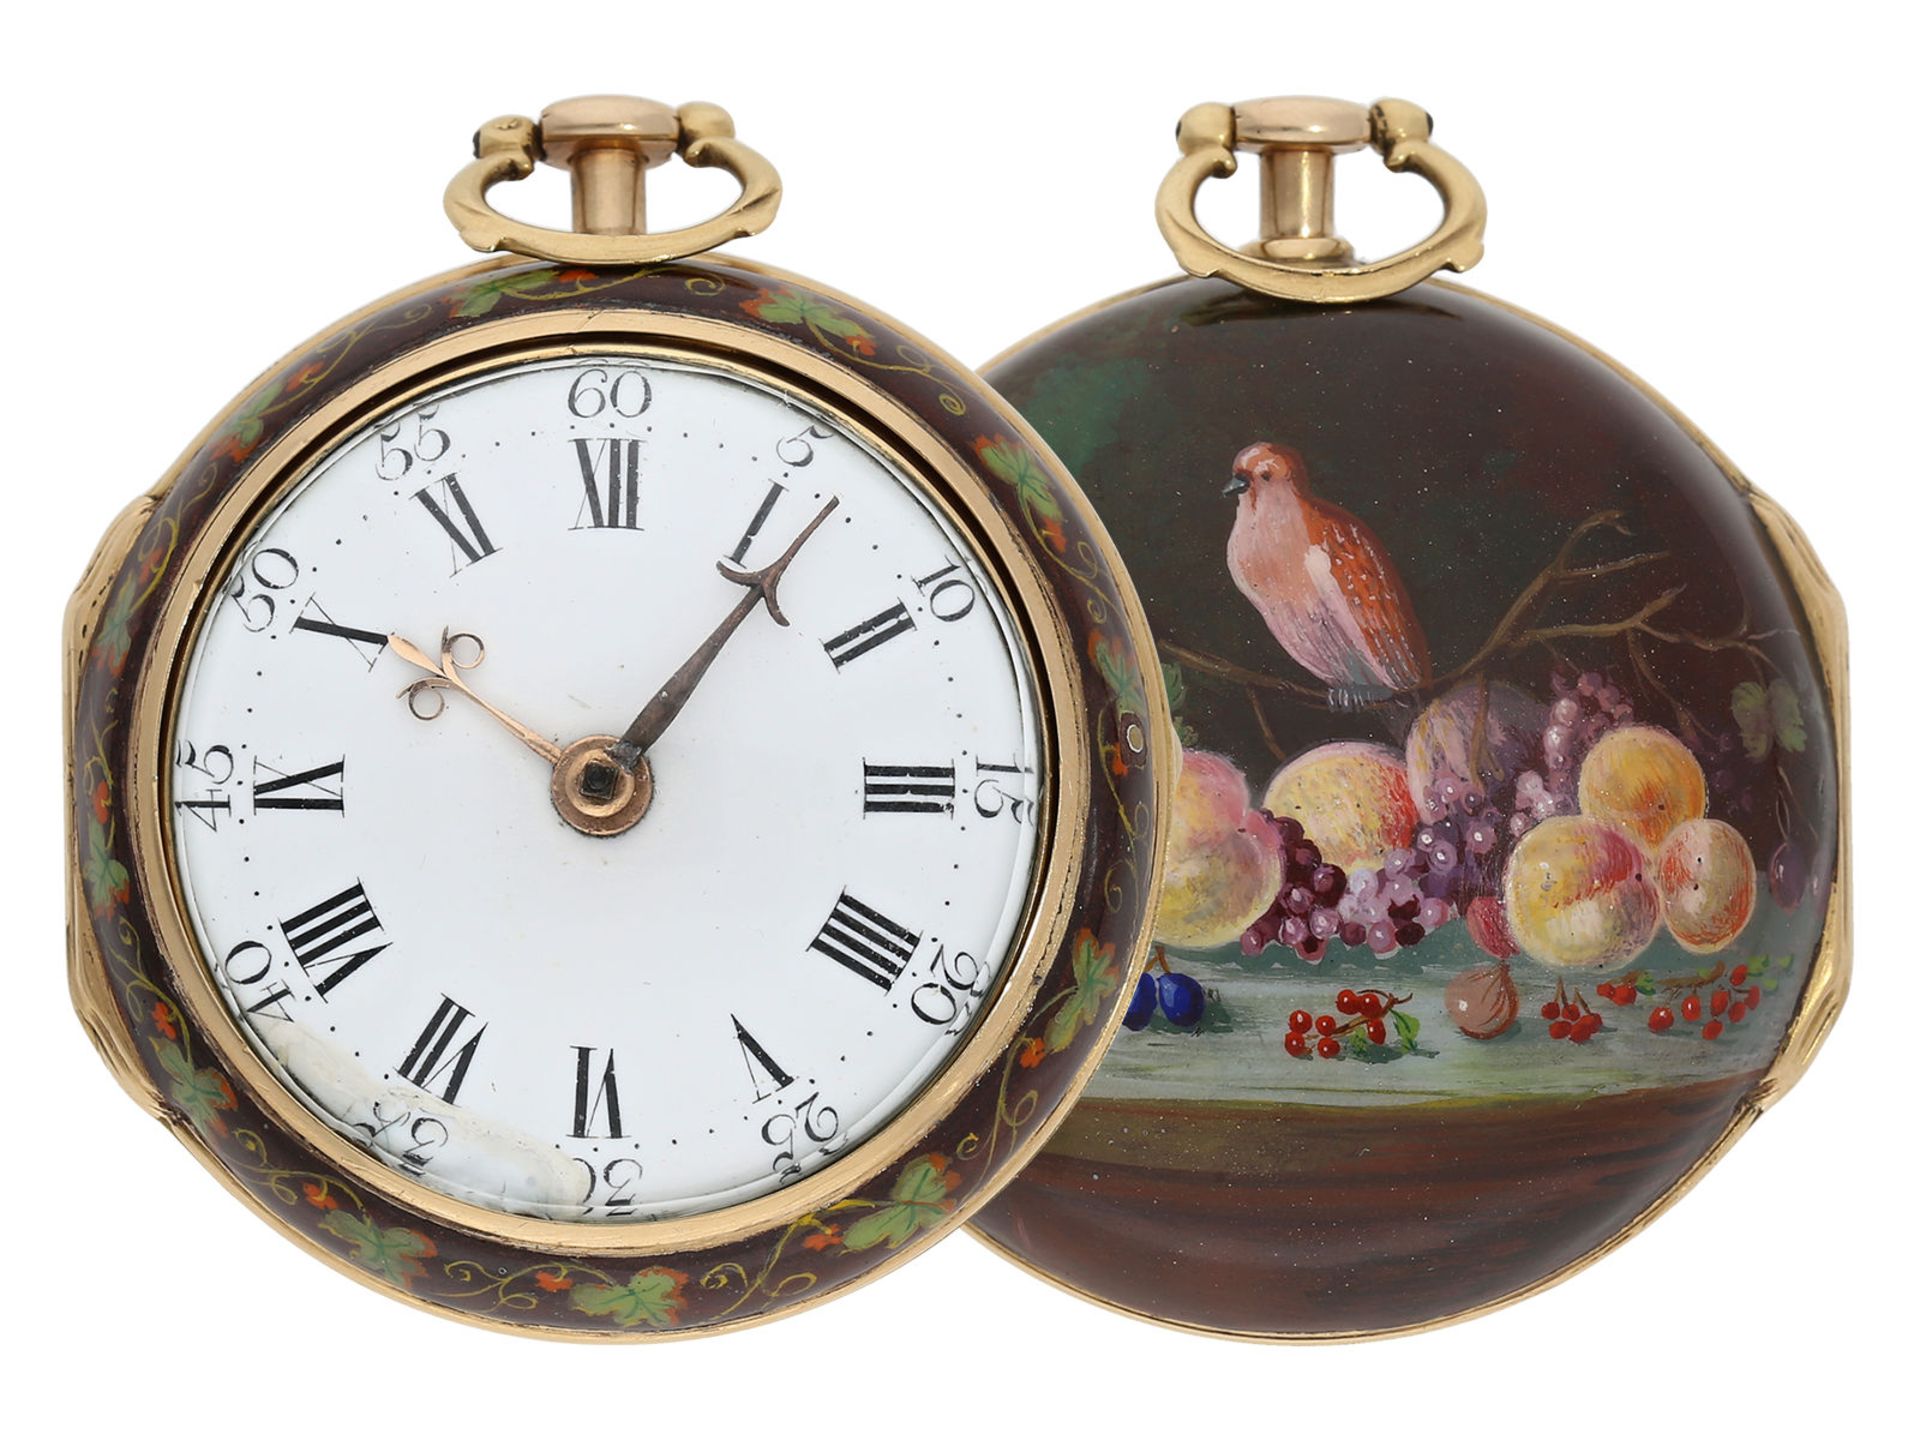 Pocket watch: English pair case gold/ enamel verge watch with very rare still life painting, Alex